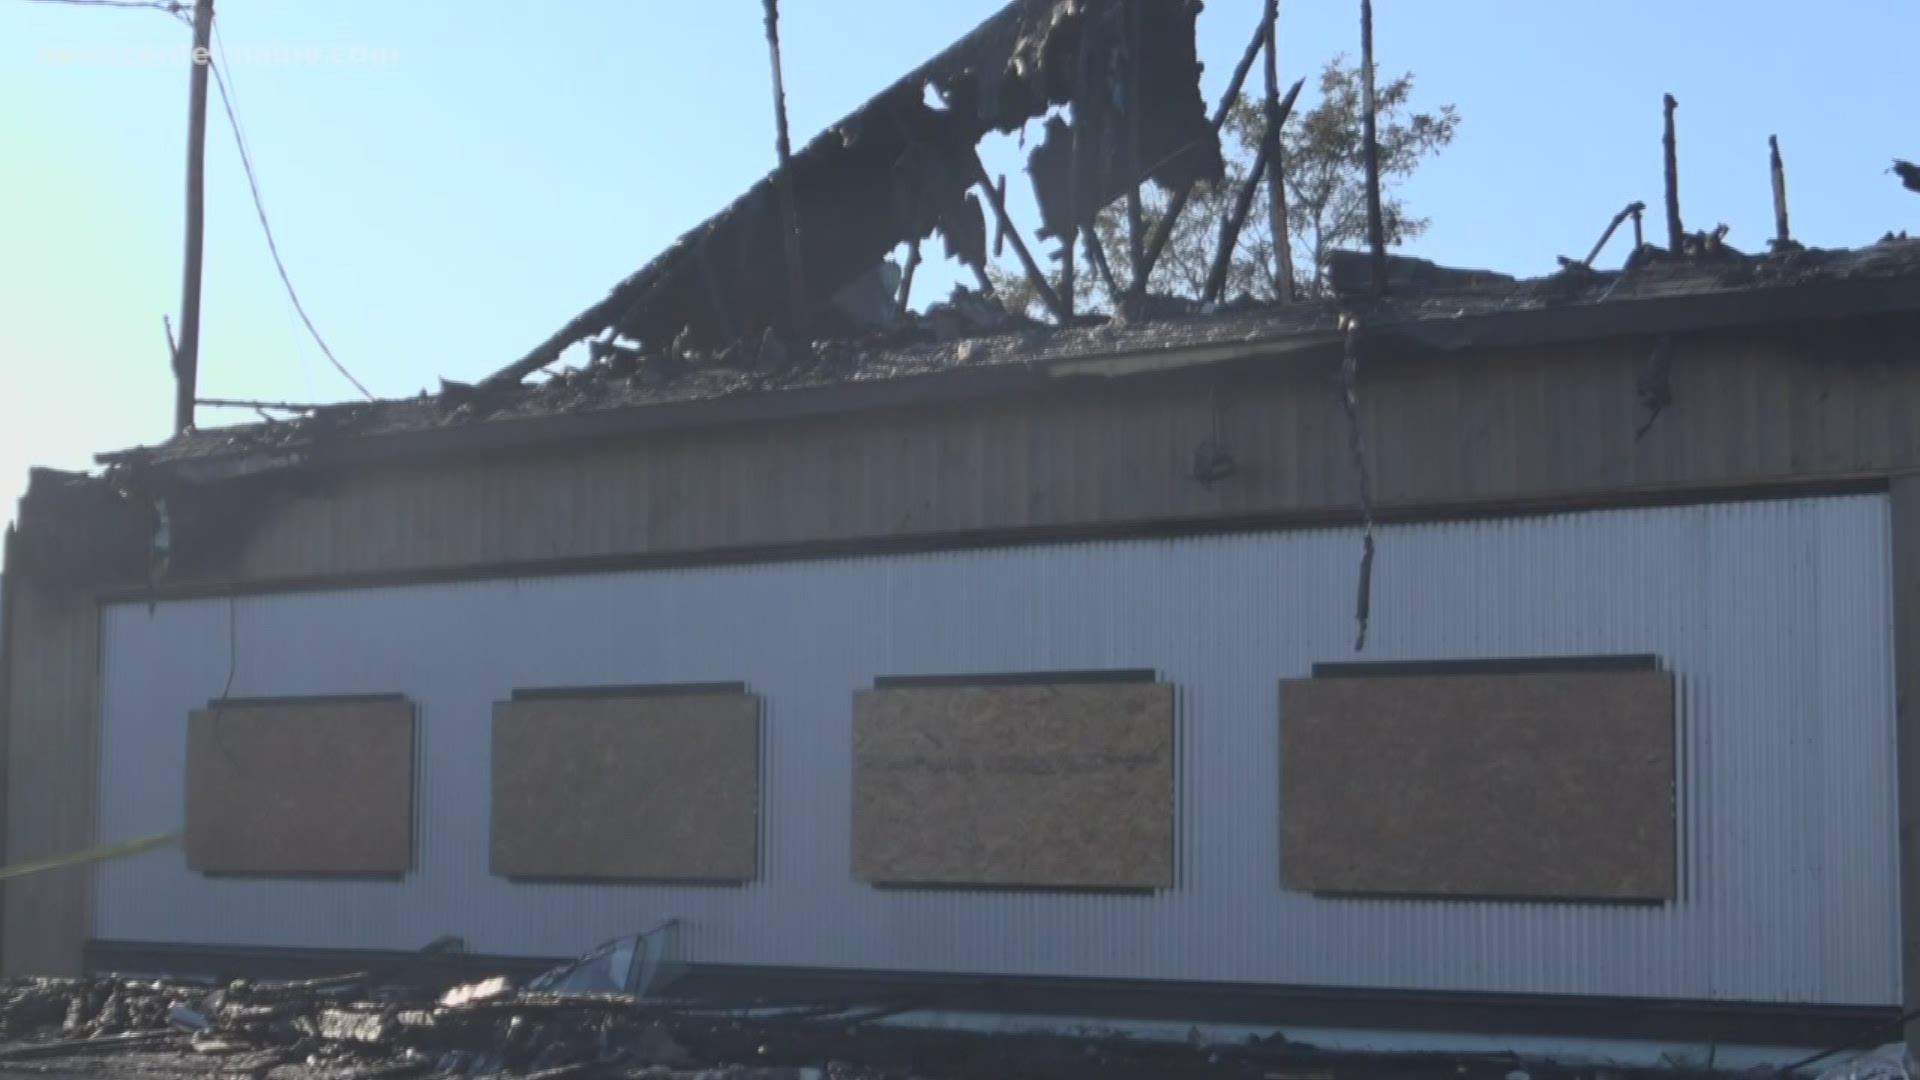 The fire that burned down the Whiskey River Smoke House restaurant in Brewer has been ruled an accident, although, the exact cause is still unclear.